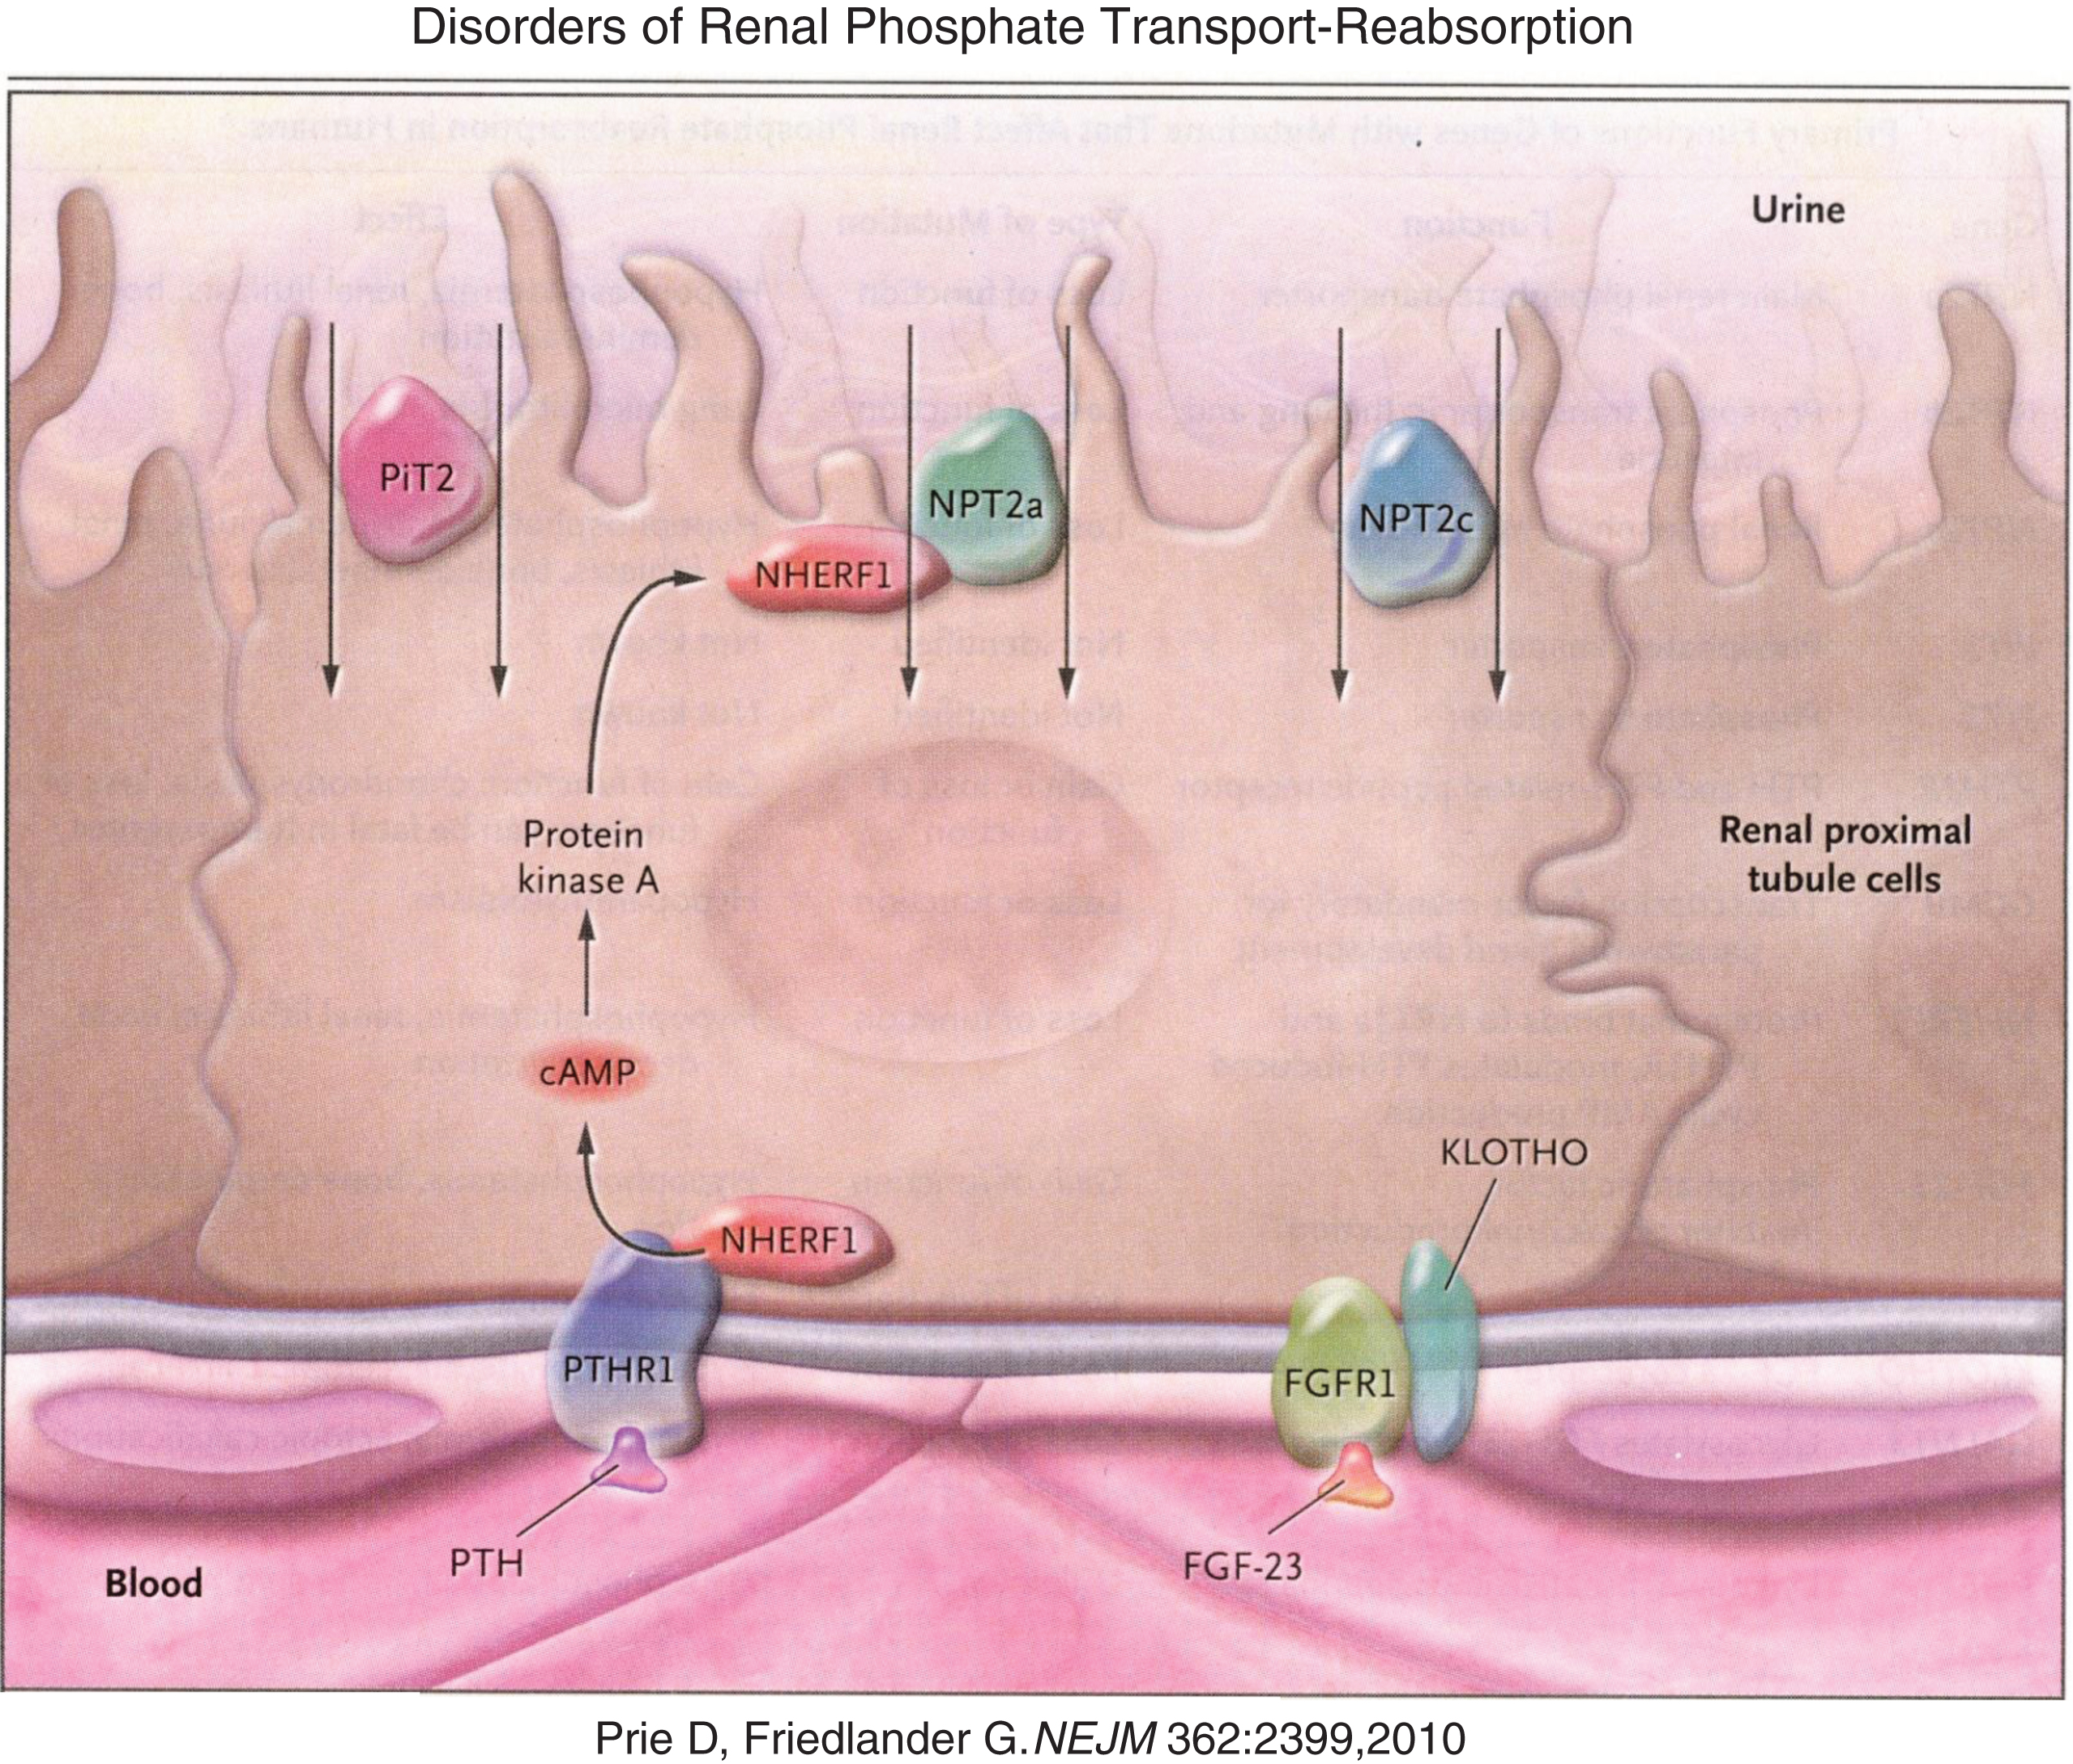 Reabsorption of phosphate from the renal tubule is blocked by PTH and FGF23 acting upon their respective receptors to down regulate the number of sodium phosphate luminal transmembrane channels through which phosphate is reabsorbed from the glomerular filtrate. (Reproduced with permission from Prie D, Friedlander G. Genetic disorders of renal phosphate transport. N Engl J Med 362:2399-2409,2010.)